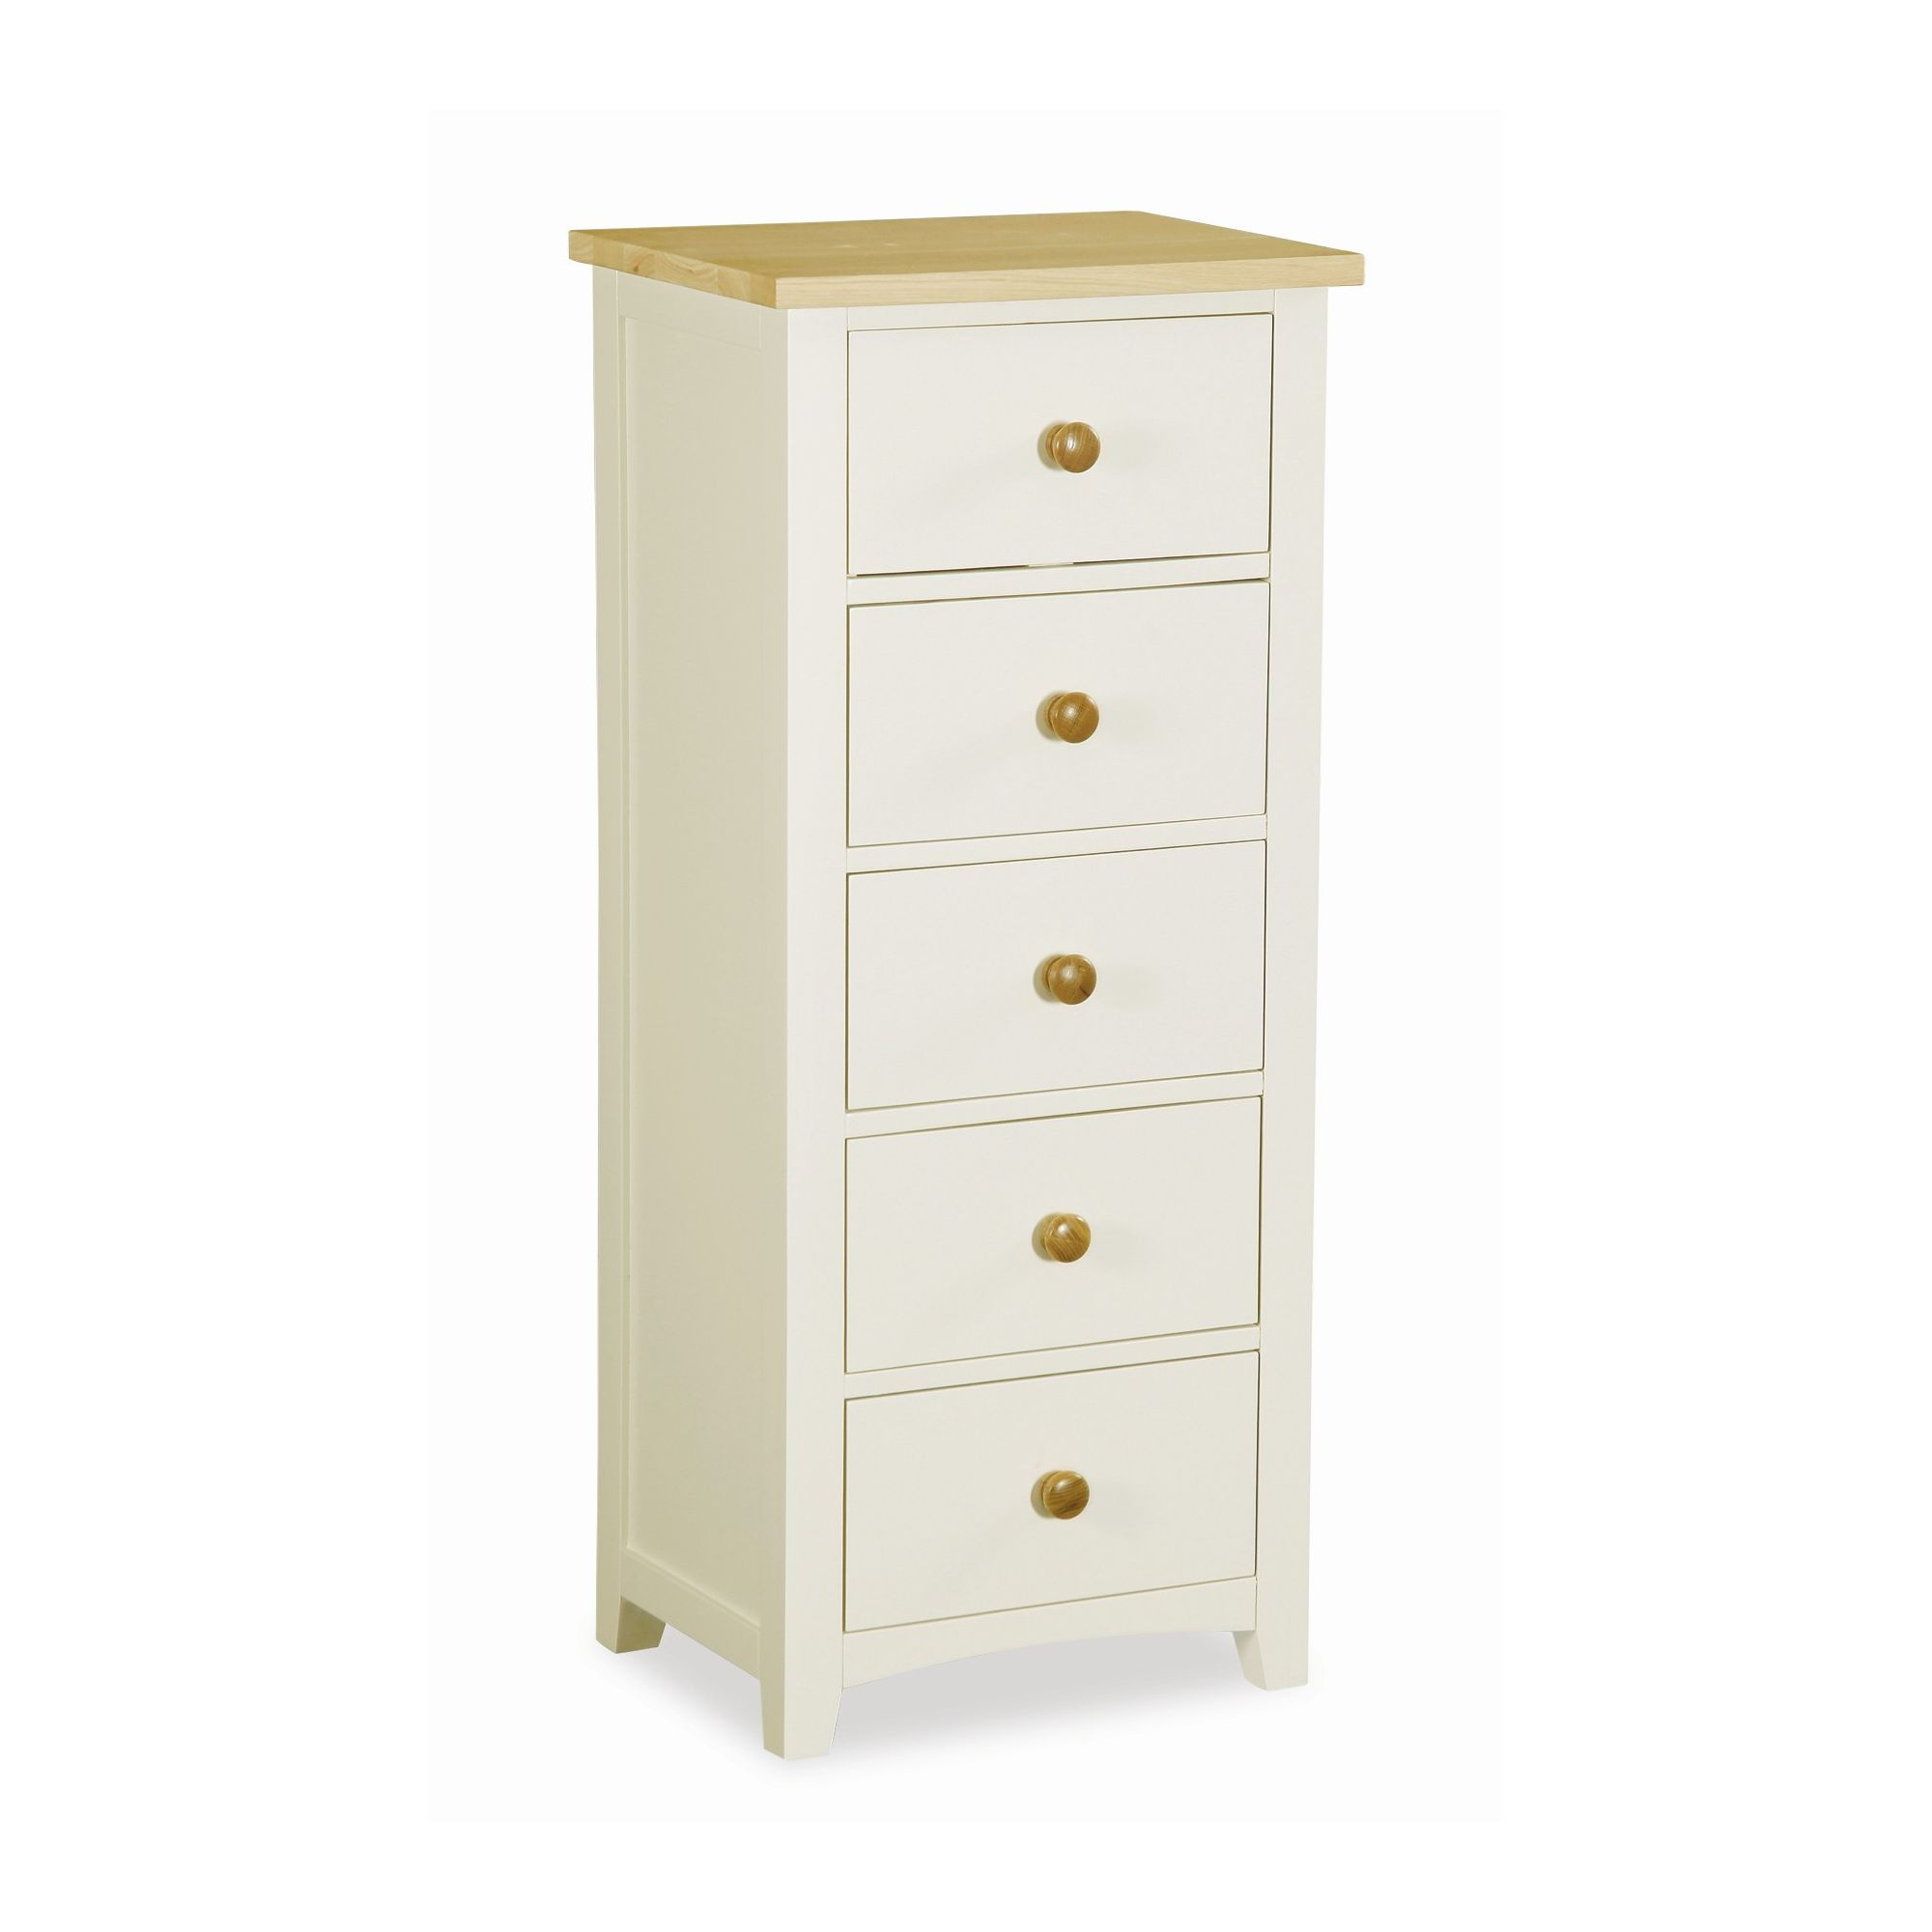 Alterton Furniture St. Ives Tallboy Chest at Tesco Direct